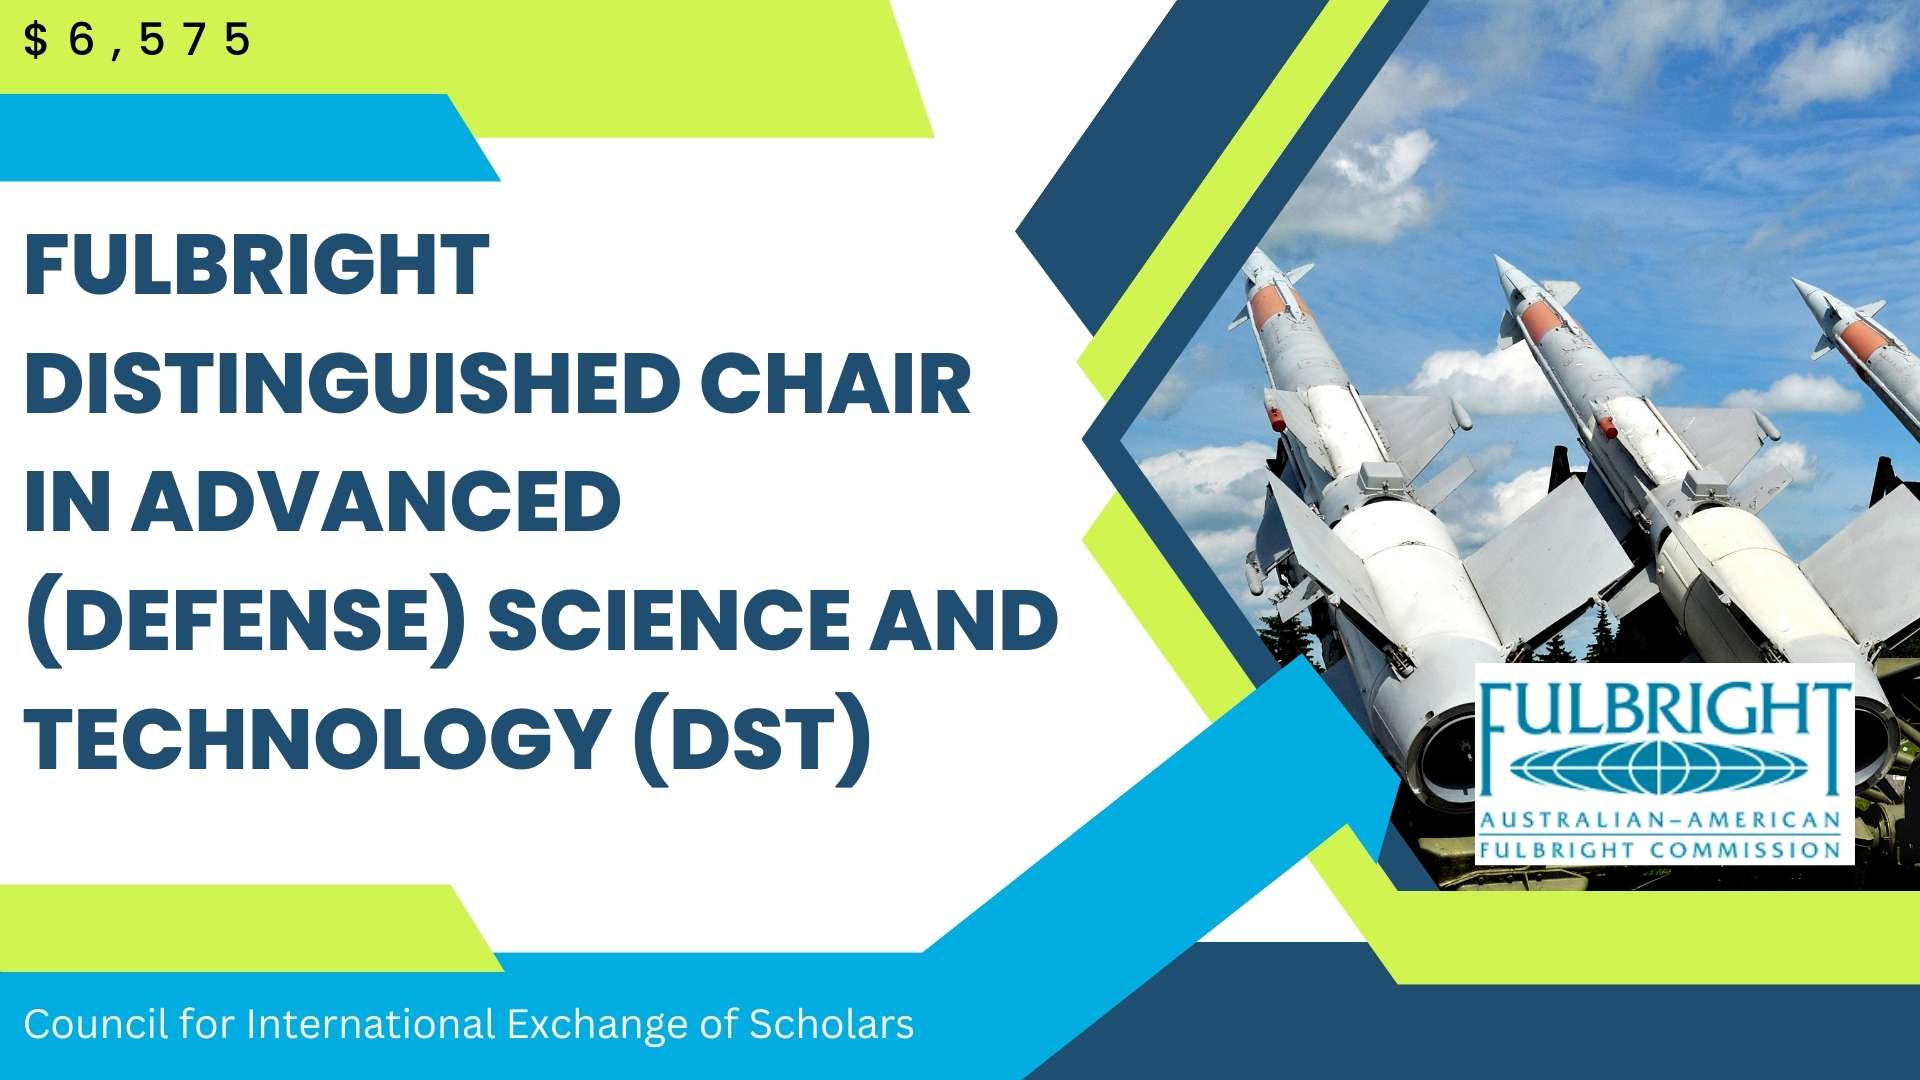 Fulbright Distinguished Chair in Advanced (Defense) Science and Technology (DST)